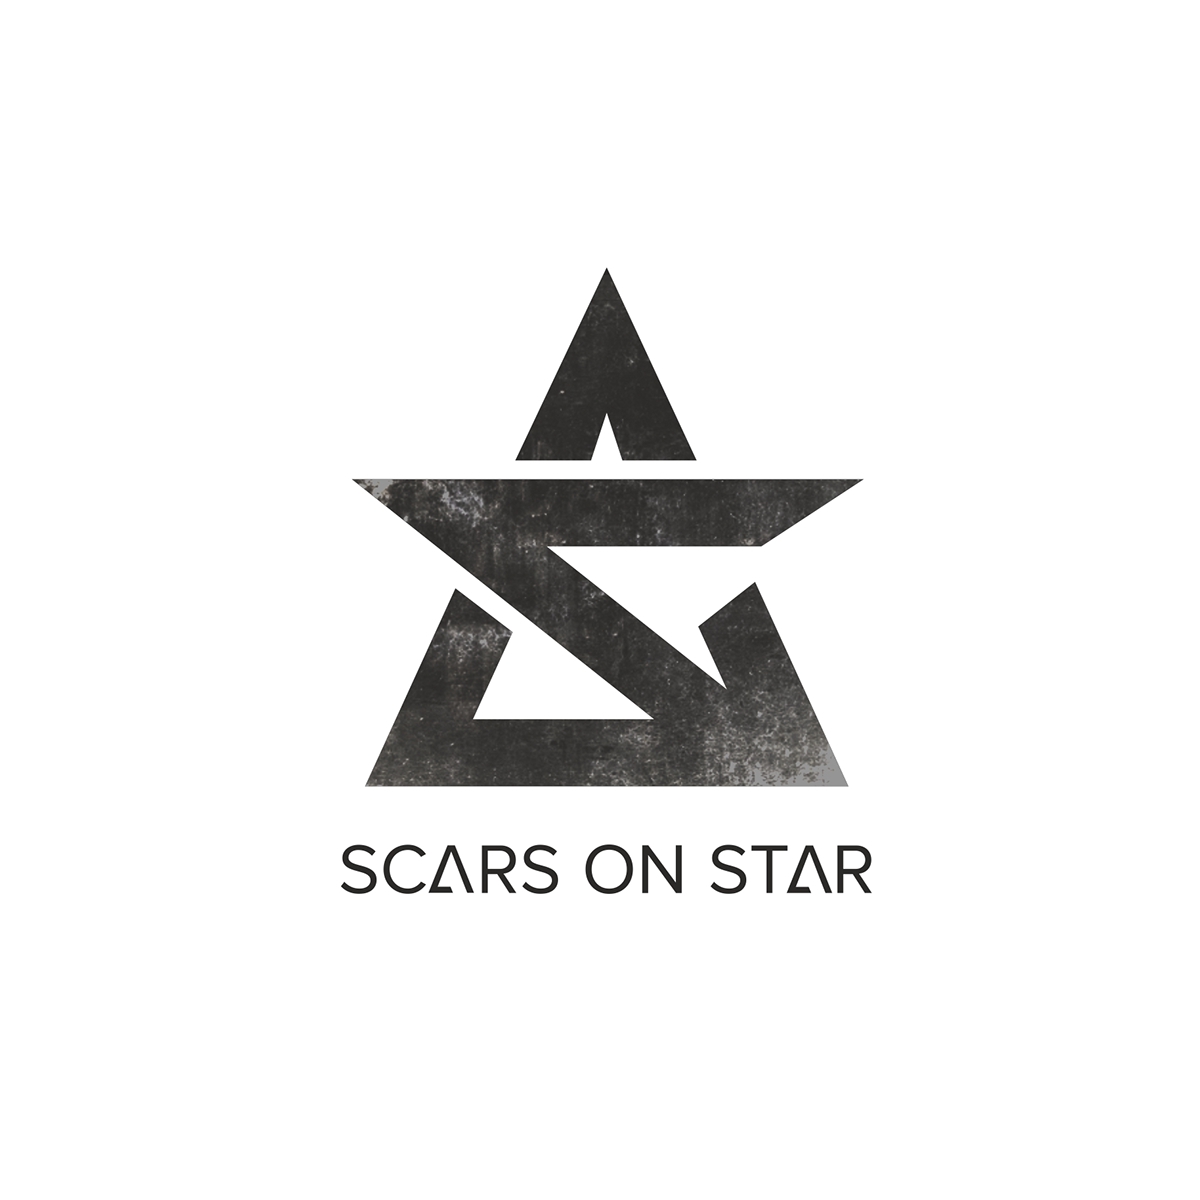 Scars on Star post-rock album cover rock group logo awesome Space  star astronaut red logo psychedelic experimental rock inception